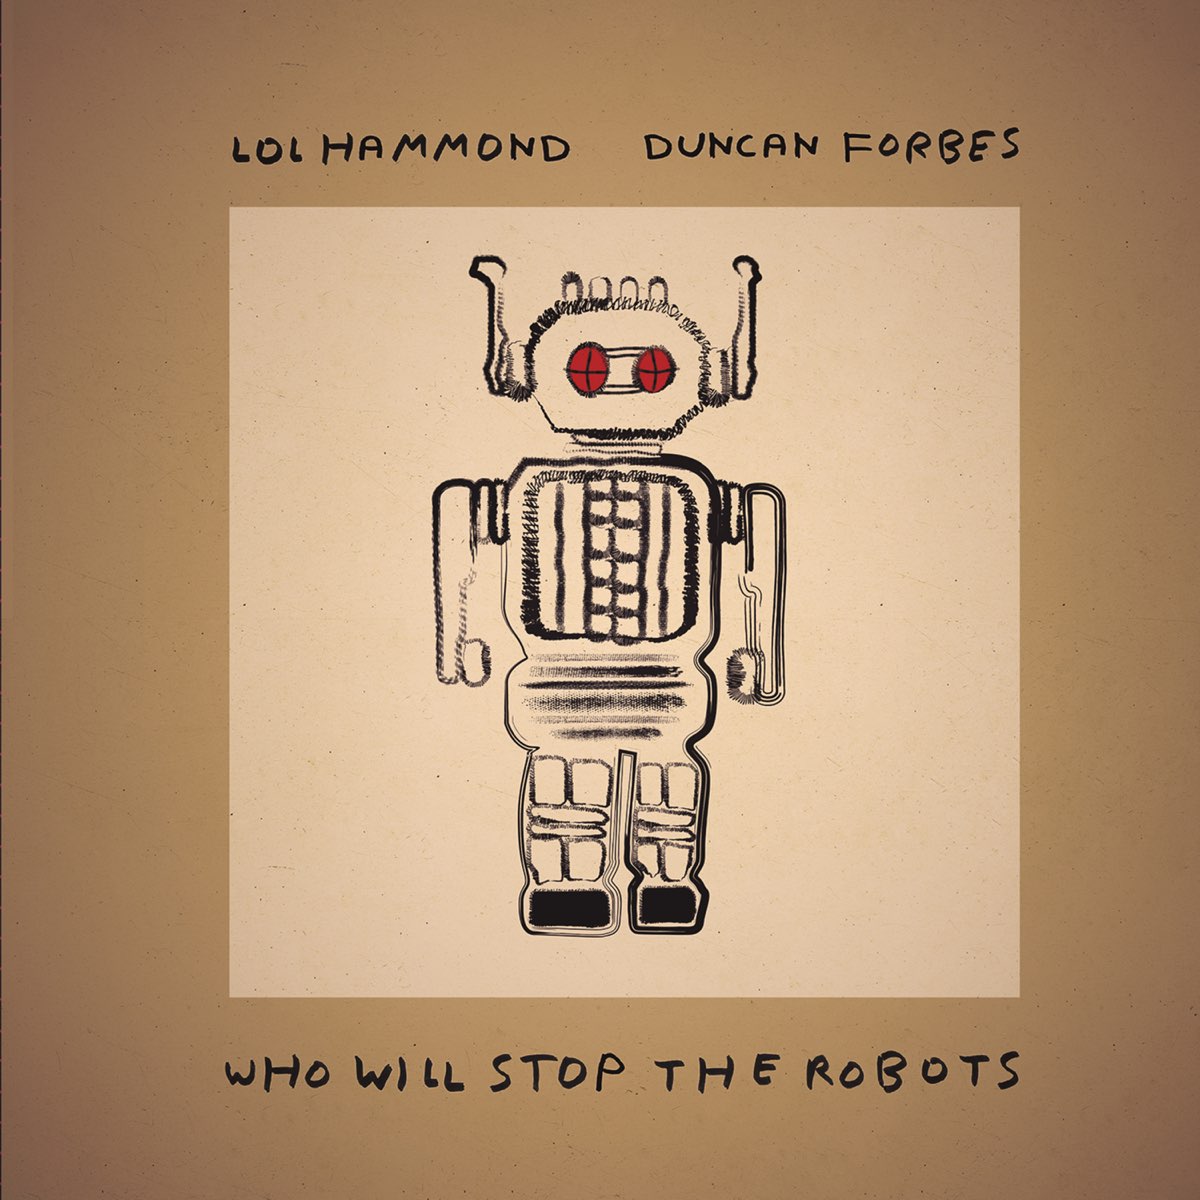 Who Will Stop the Robots? by Lol Hammond & Duncan Forbes on Apple Music